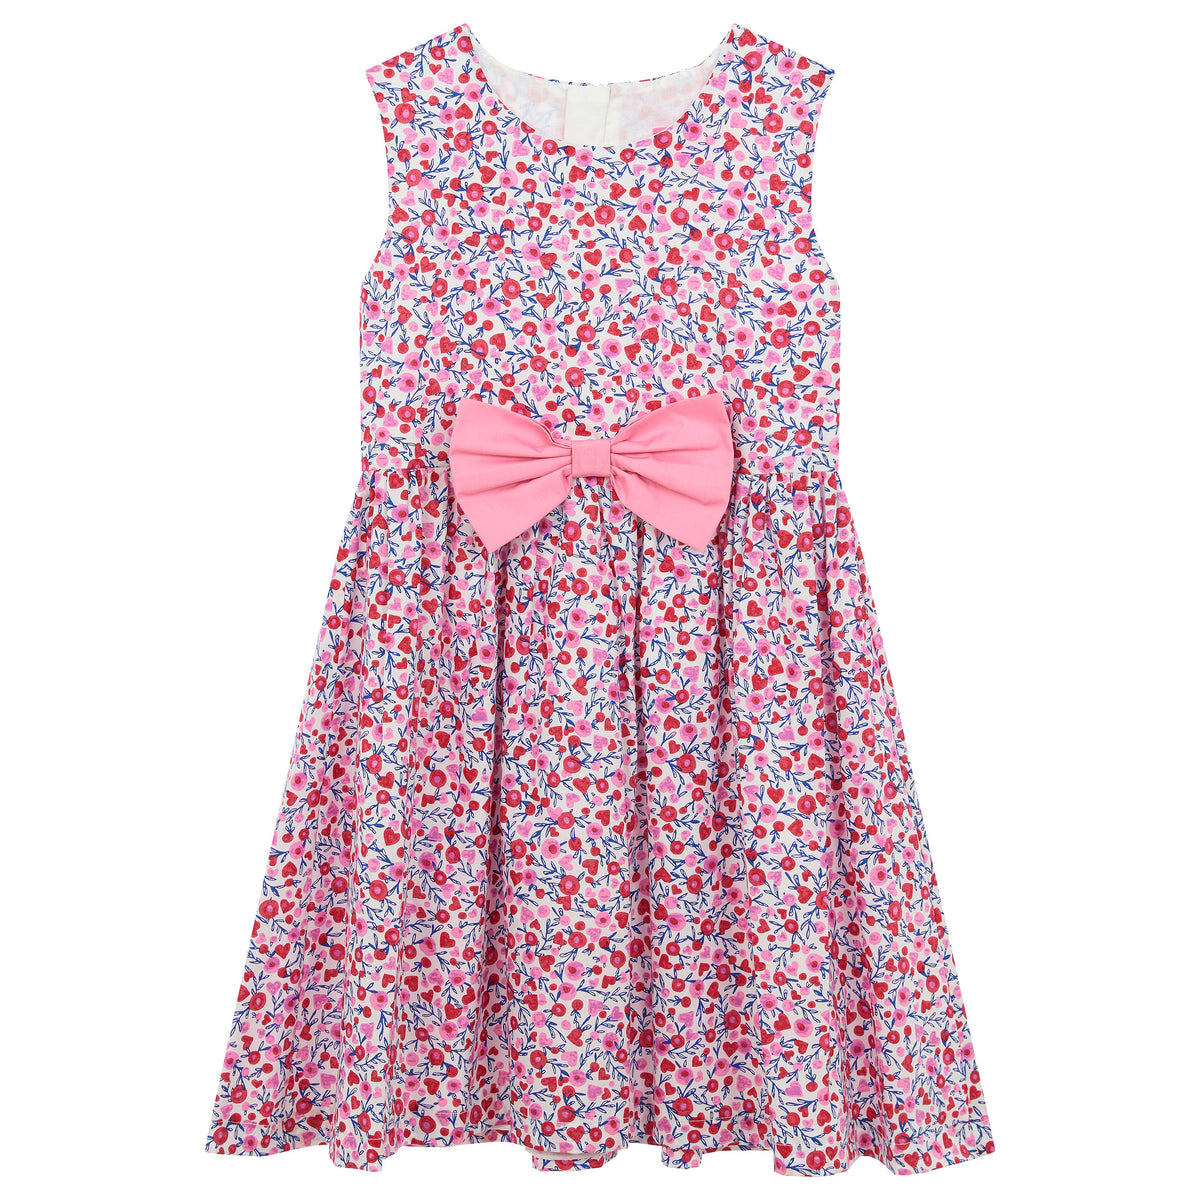 Isobel Heart Floral Print Girls Cotton Dress Pink | Holly Hastie London